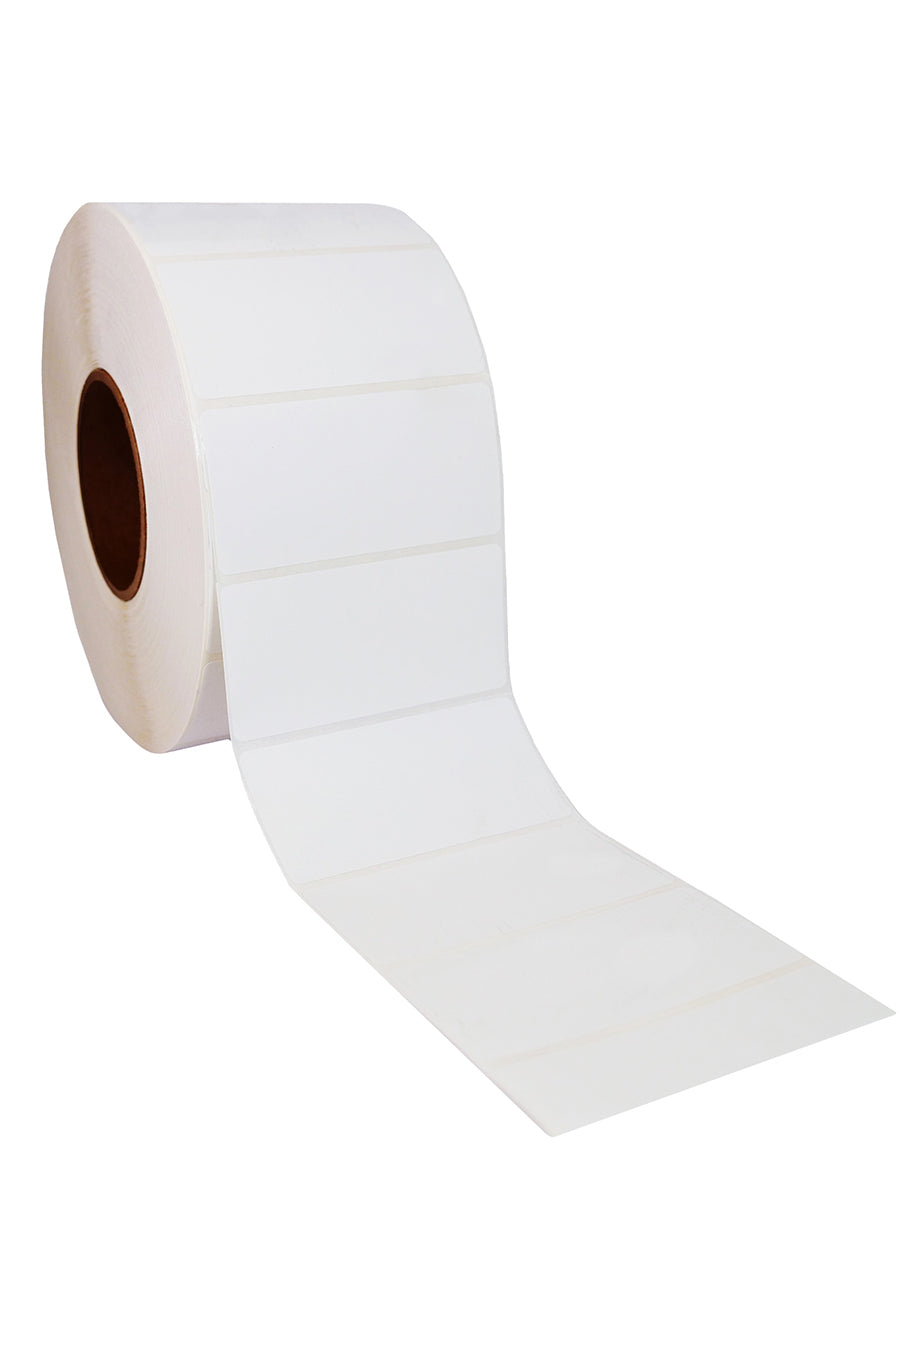 Direct Thermal White Shipping Labels, 4" x 2", 2750/Roll, 4 Rolls/Ea